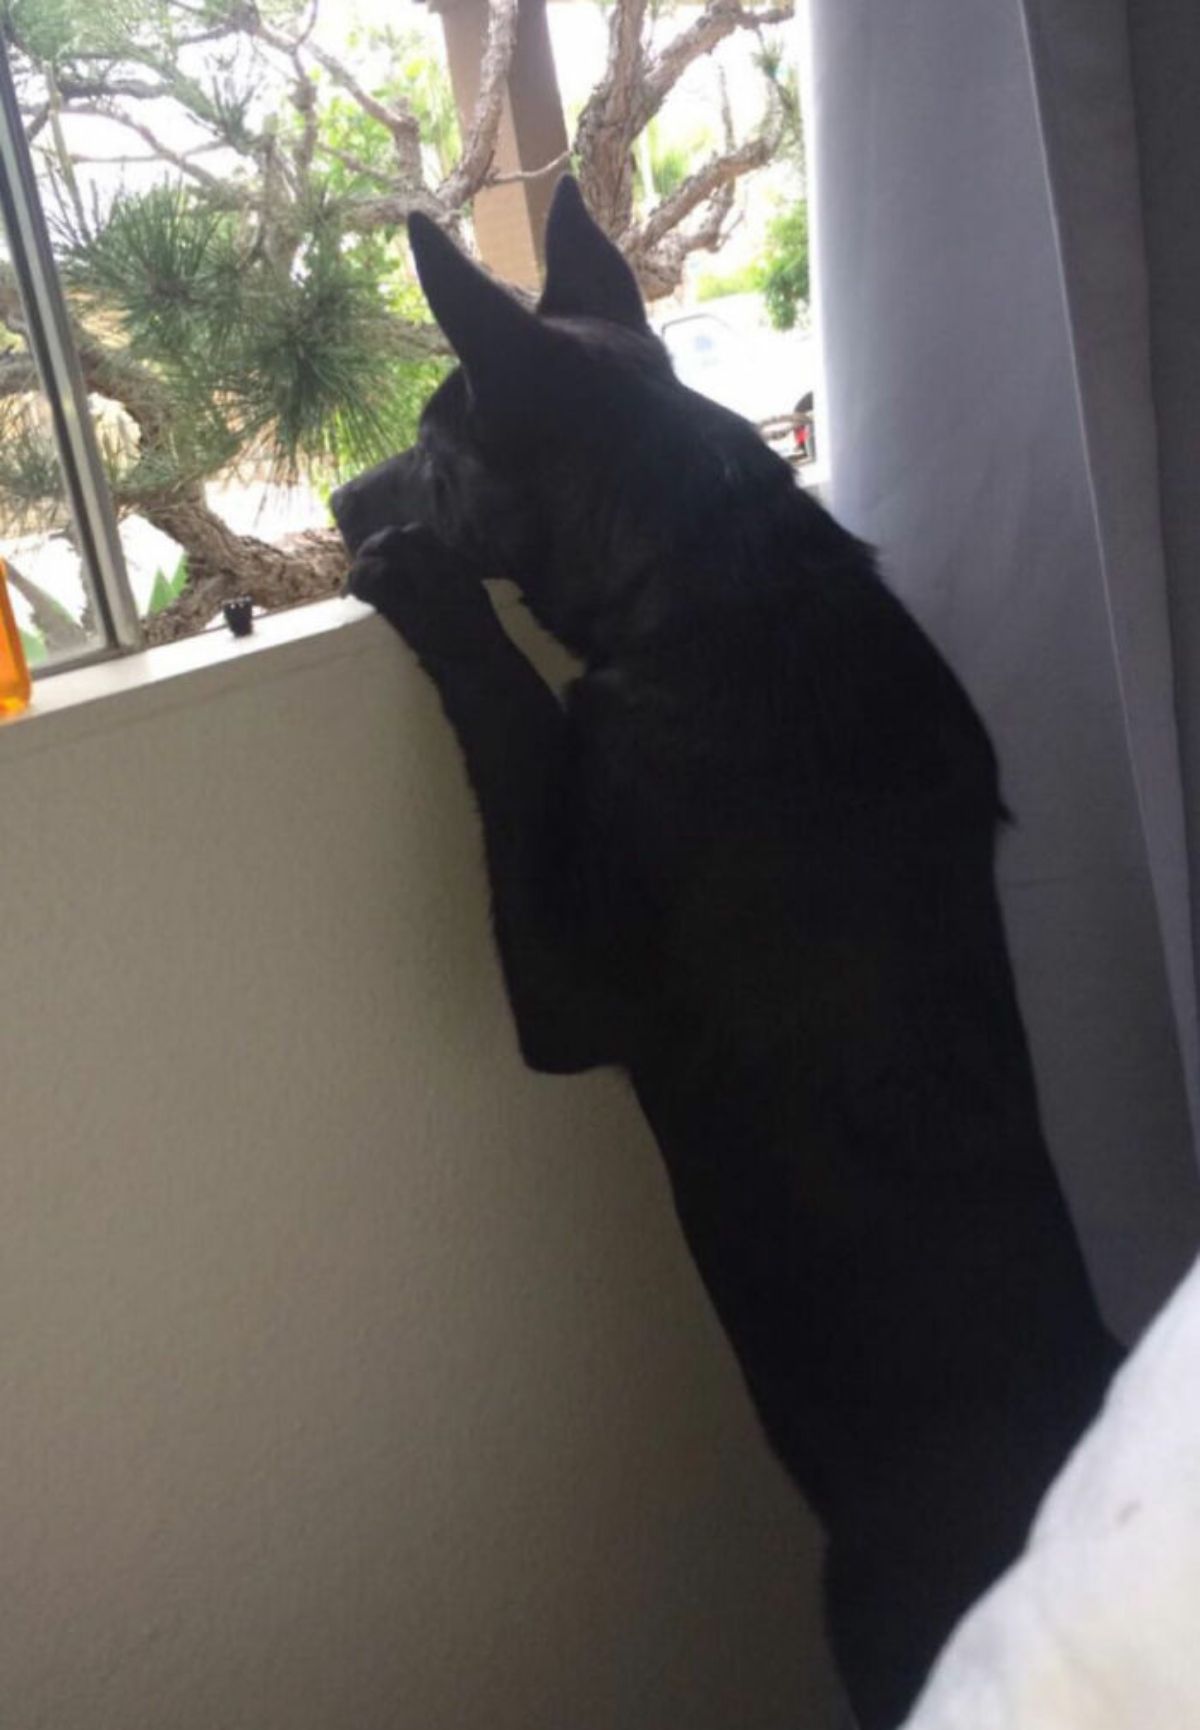 black dog standing on hind legs and looking out of a window